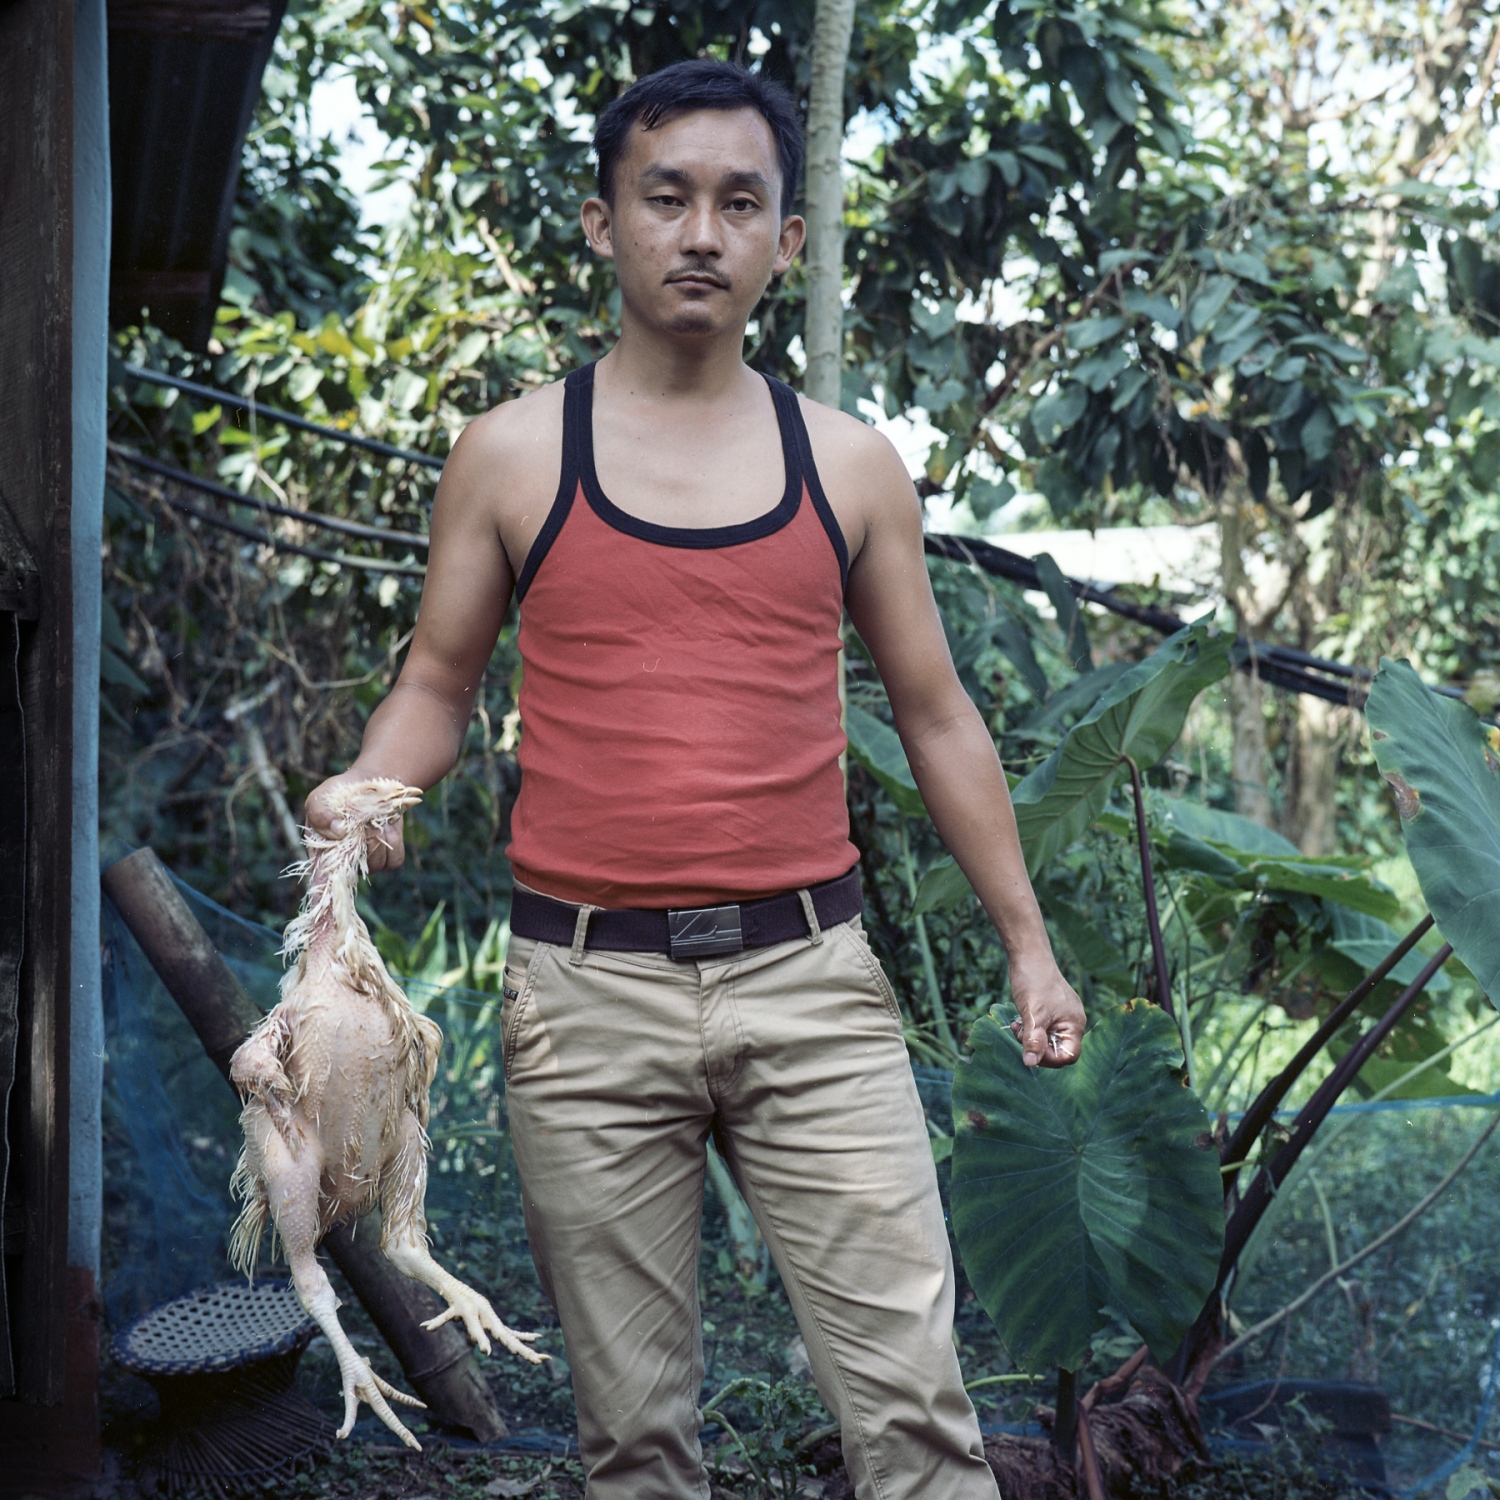  Salam Enao Meitei, 30. Thanga Tongbram Leikai, Manipur Salam Enao Meitei, a poultry owner, poses for a portrait while preparing a meal for a luncheon. The younger generation in communities surrounding Loktak is moving away from the traditional livelihood of fishing because making a living from fishing has become challenging. The older generation has been encouraging the younger generation to get an education to find a different means of livelihood. 